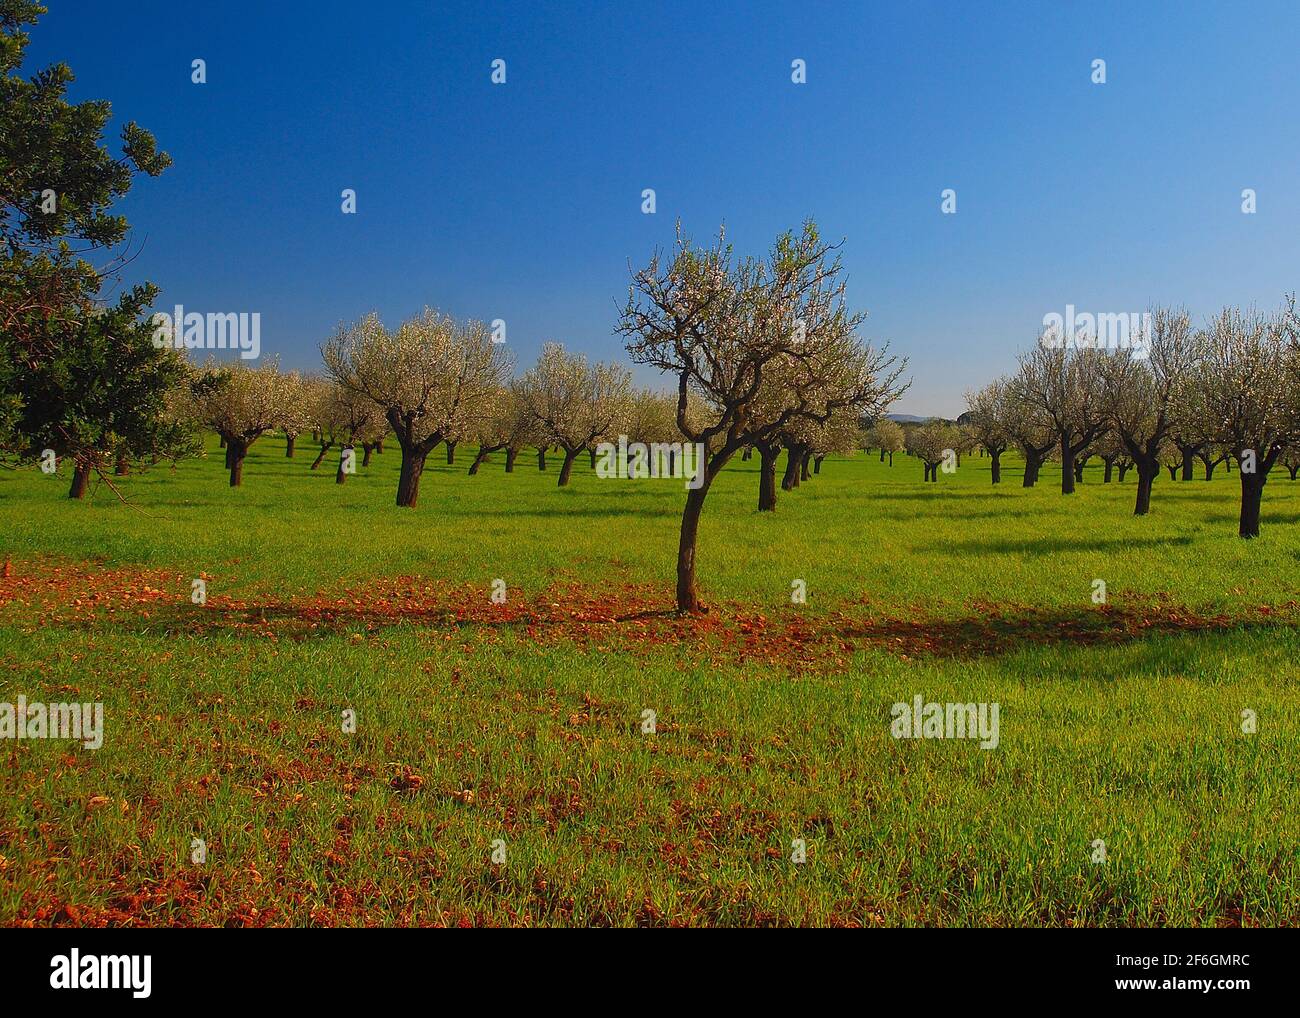 Rows Of Crooked Blooming Almond Trees On A Meadow In An Agricultural Field With Wildflowers In The Foreground On The Balearic Island Mallorca During A Stock Photo